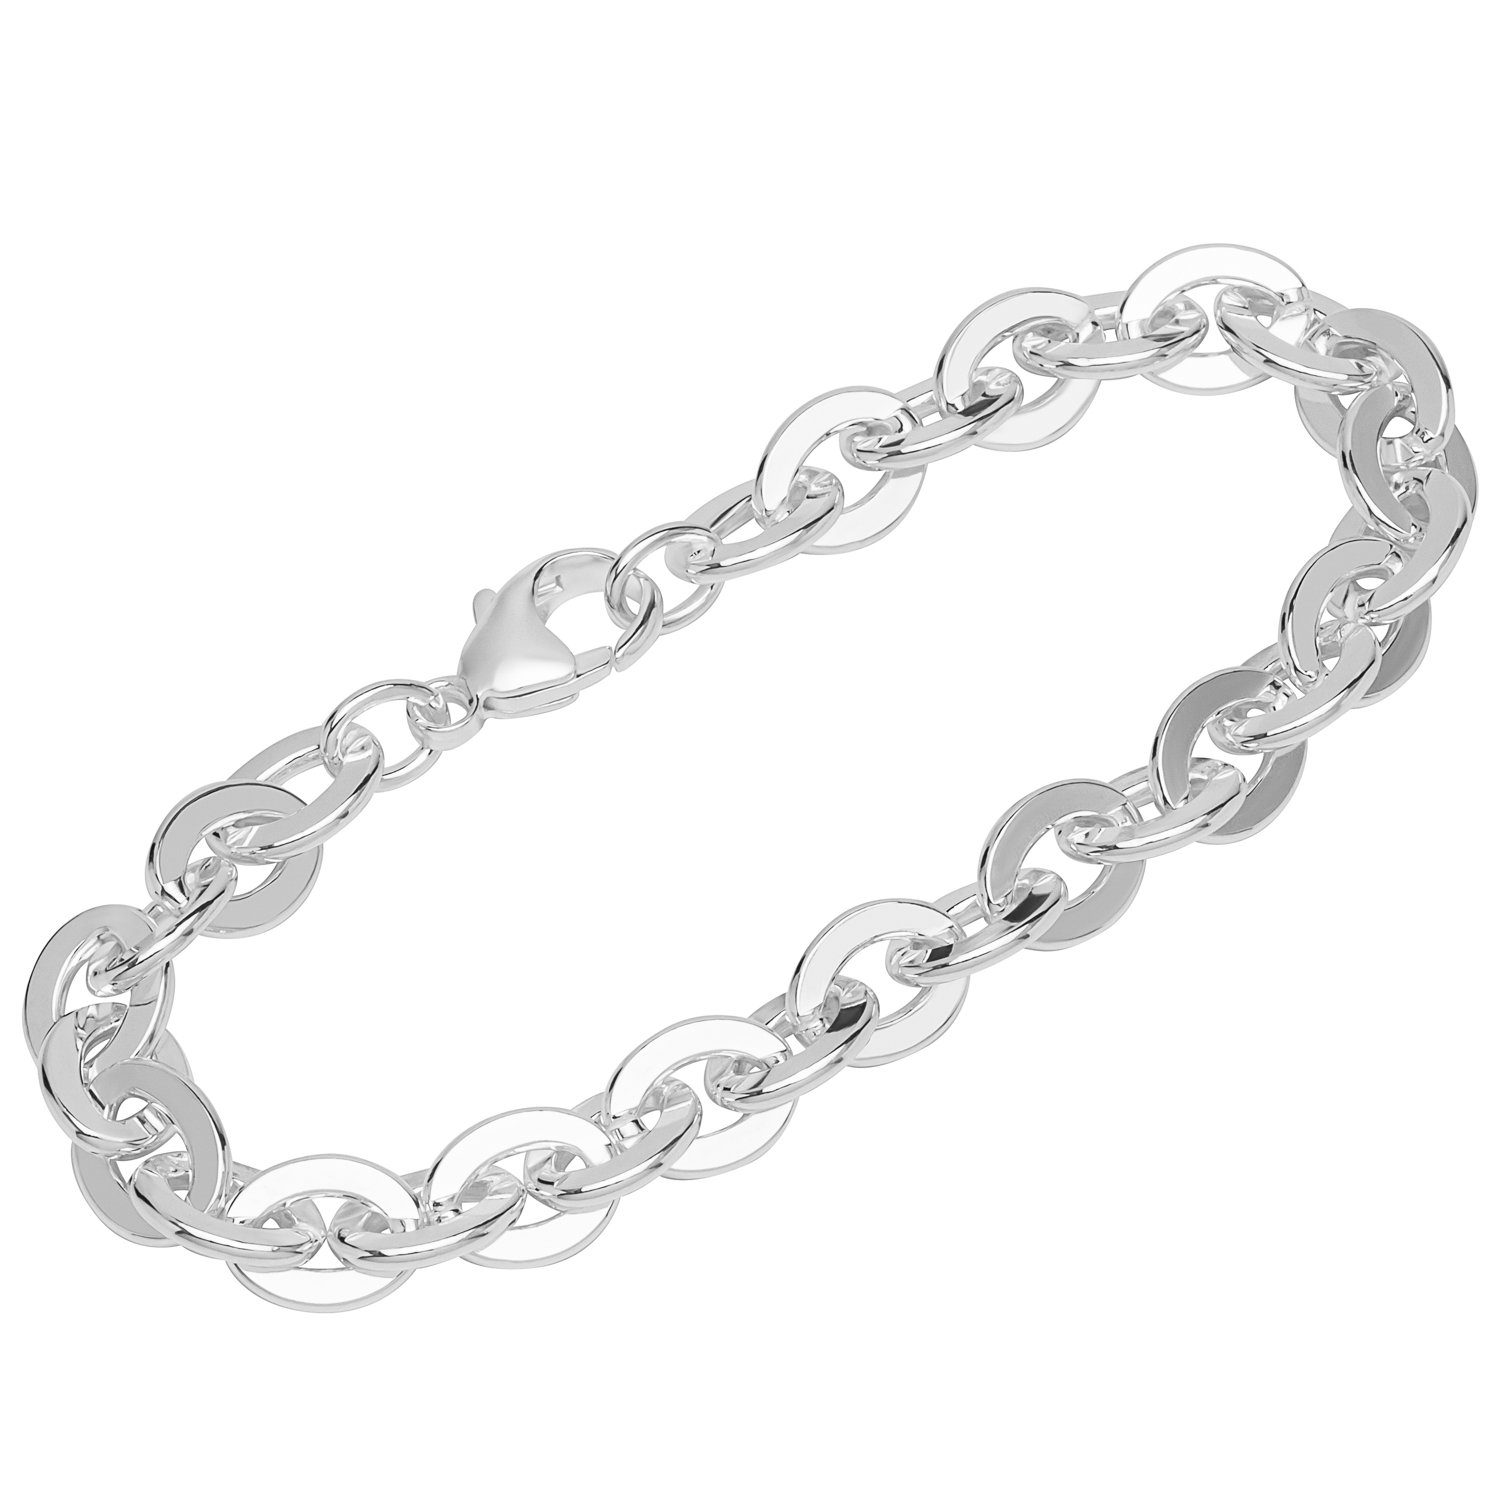 NKlaus Silberarmband Armband 925 Sterling Silber 22cm Weit Ankerkette f (1 Stück), Made in Germany